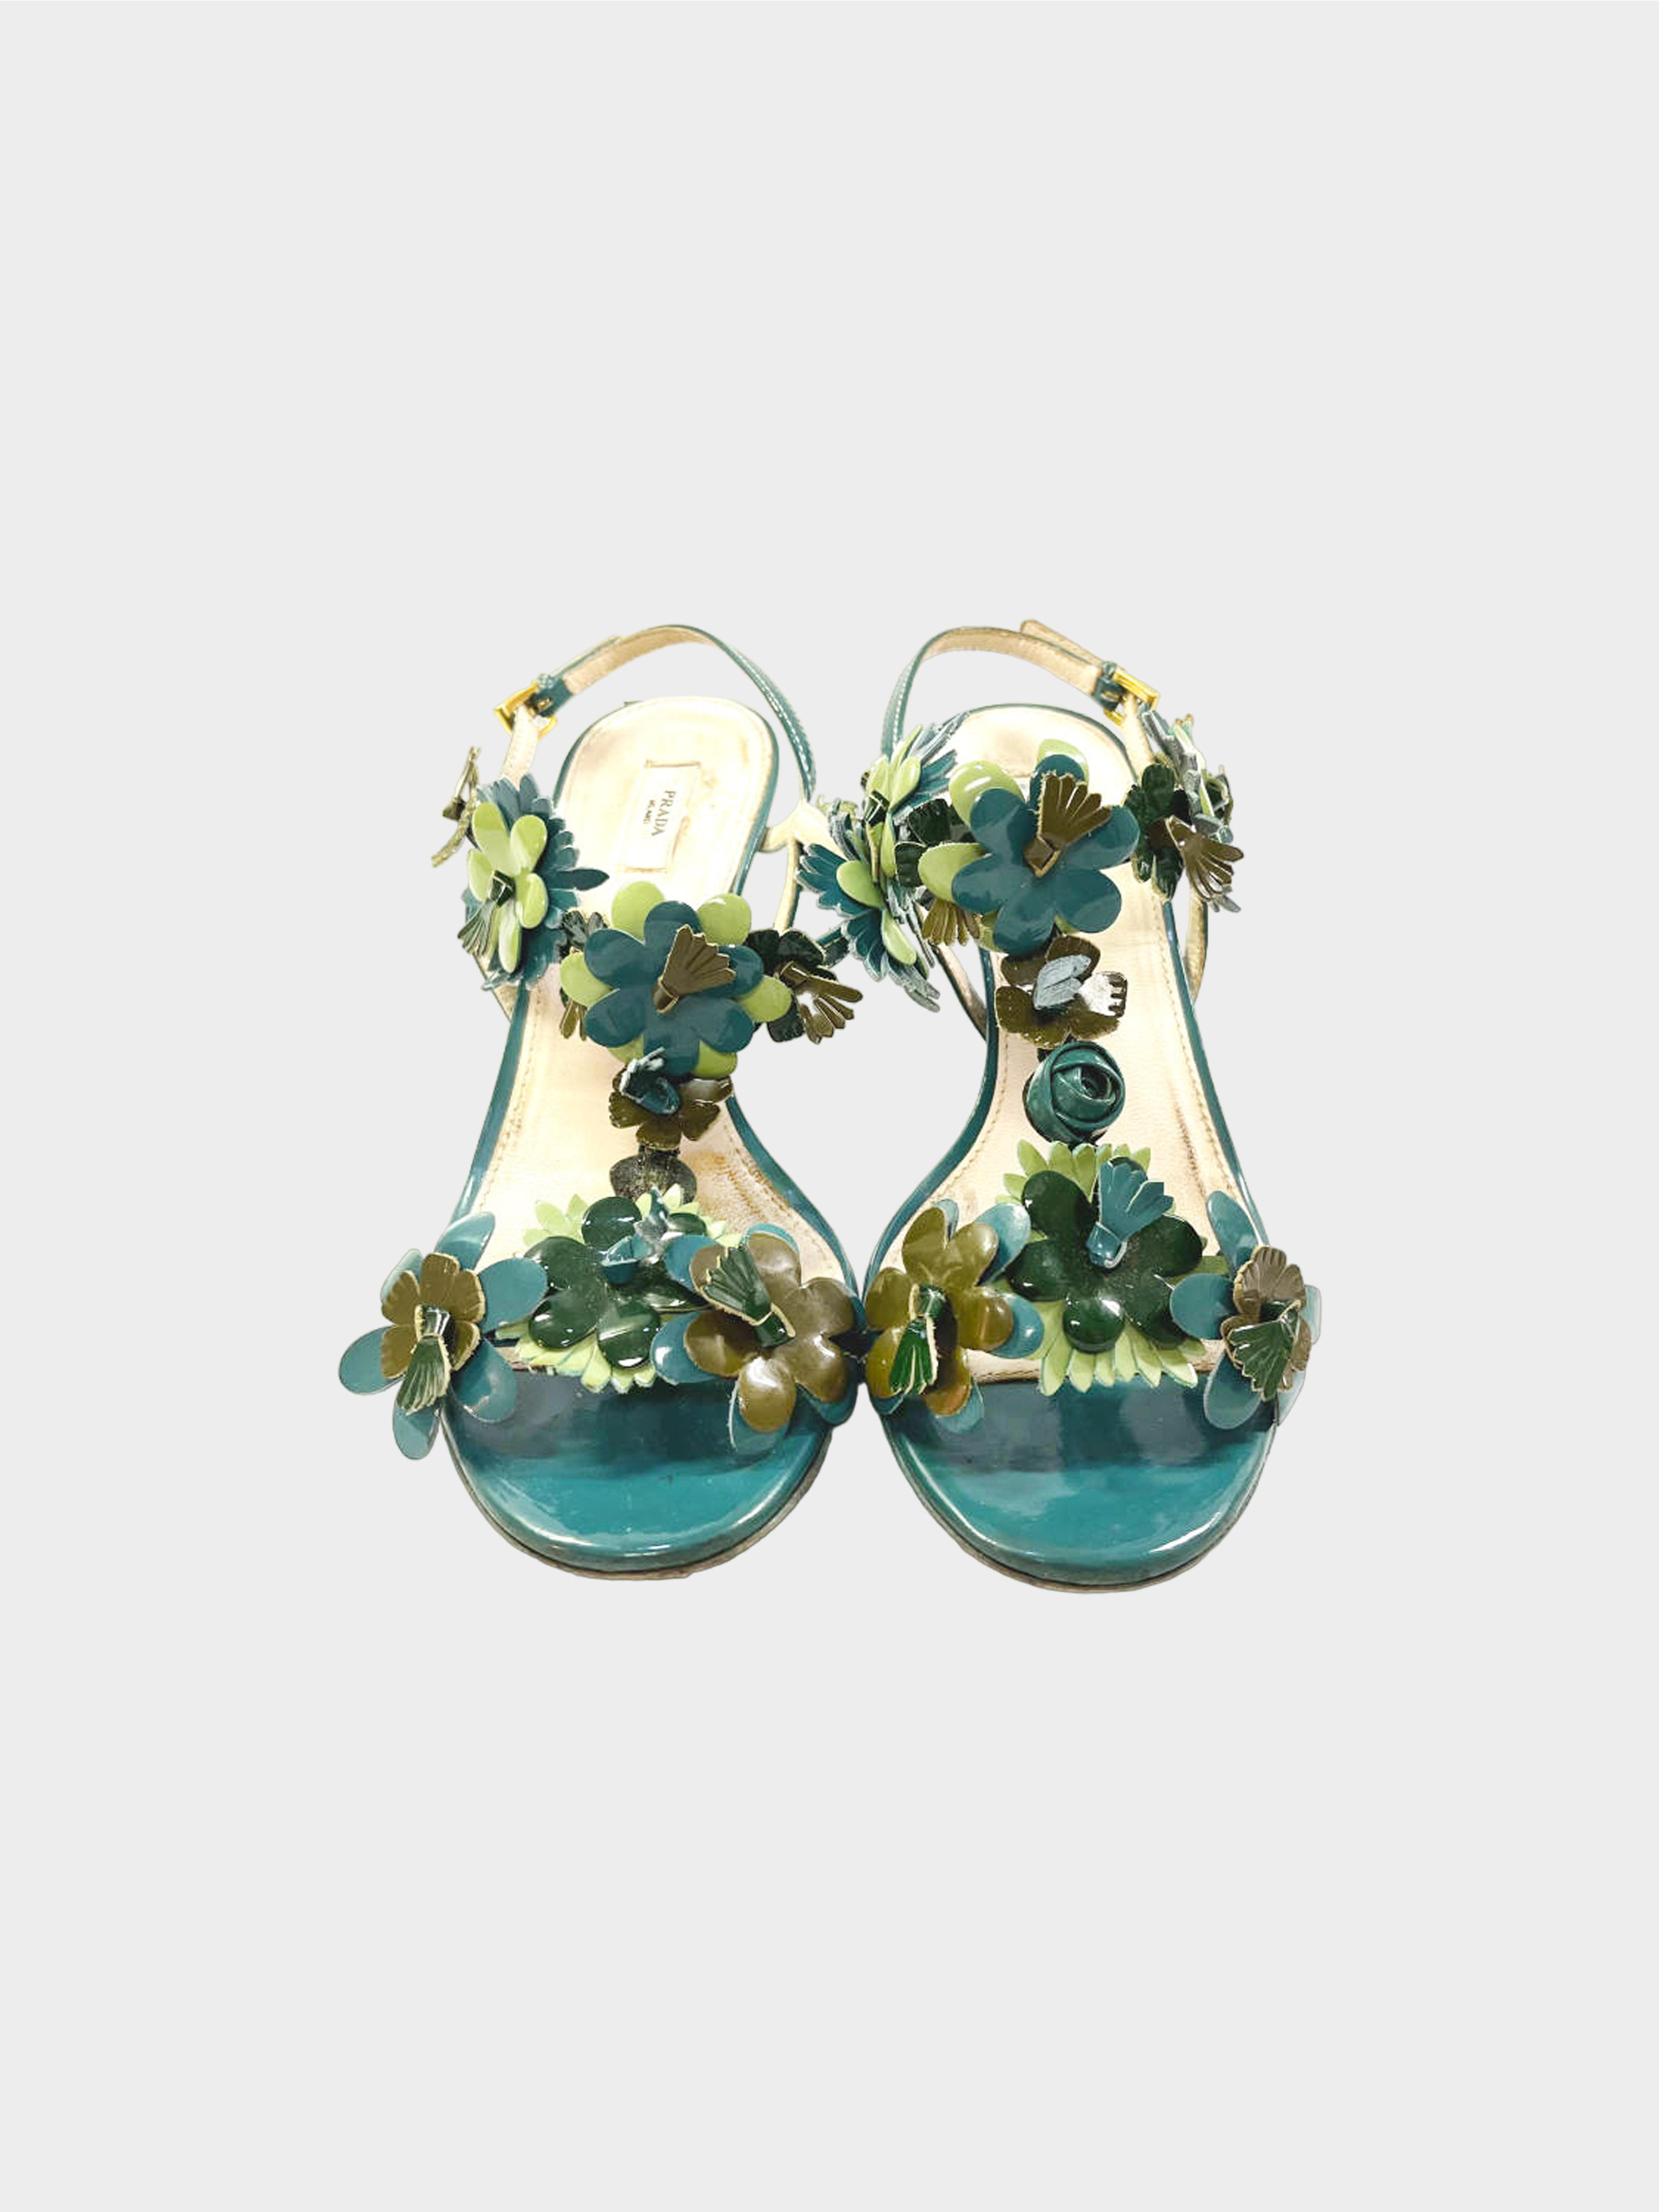 Prada 2000s Limited Edition Green Floral Heels